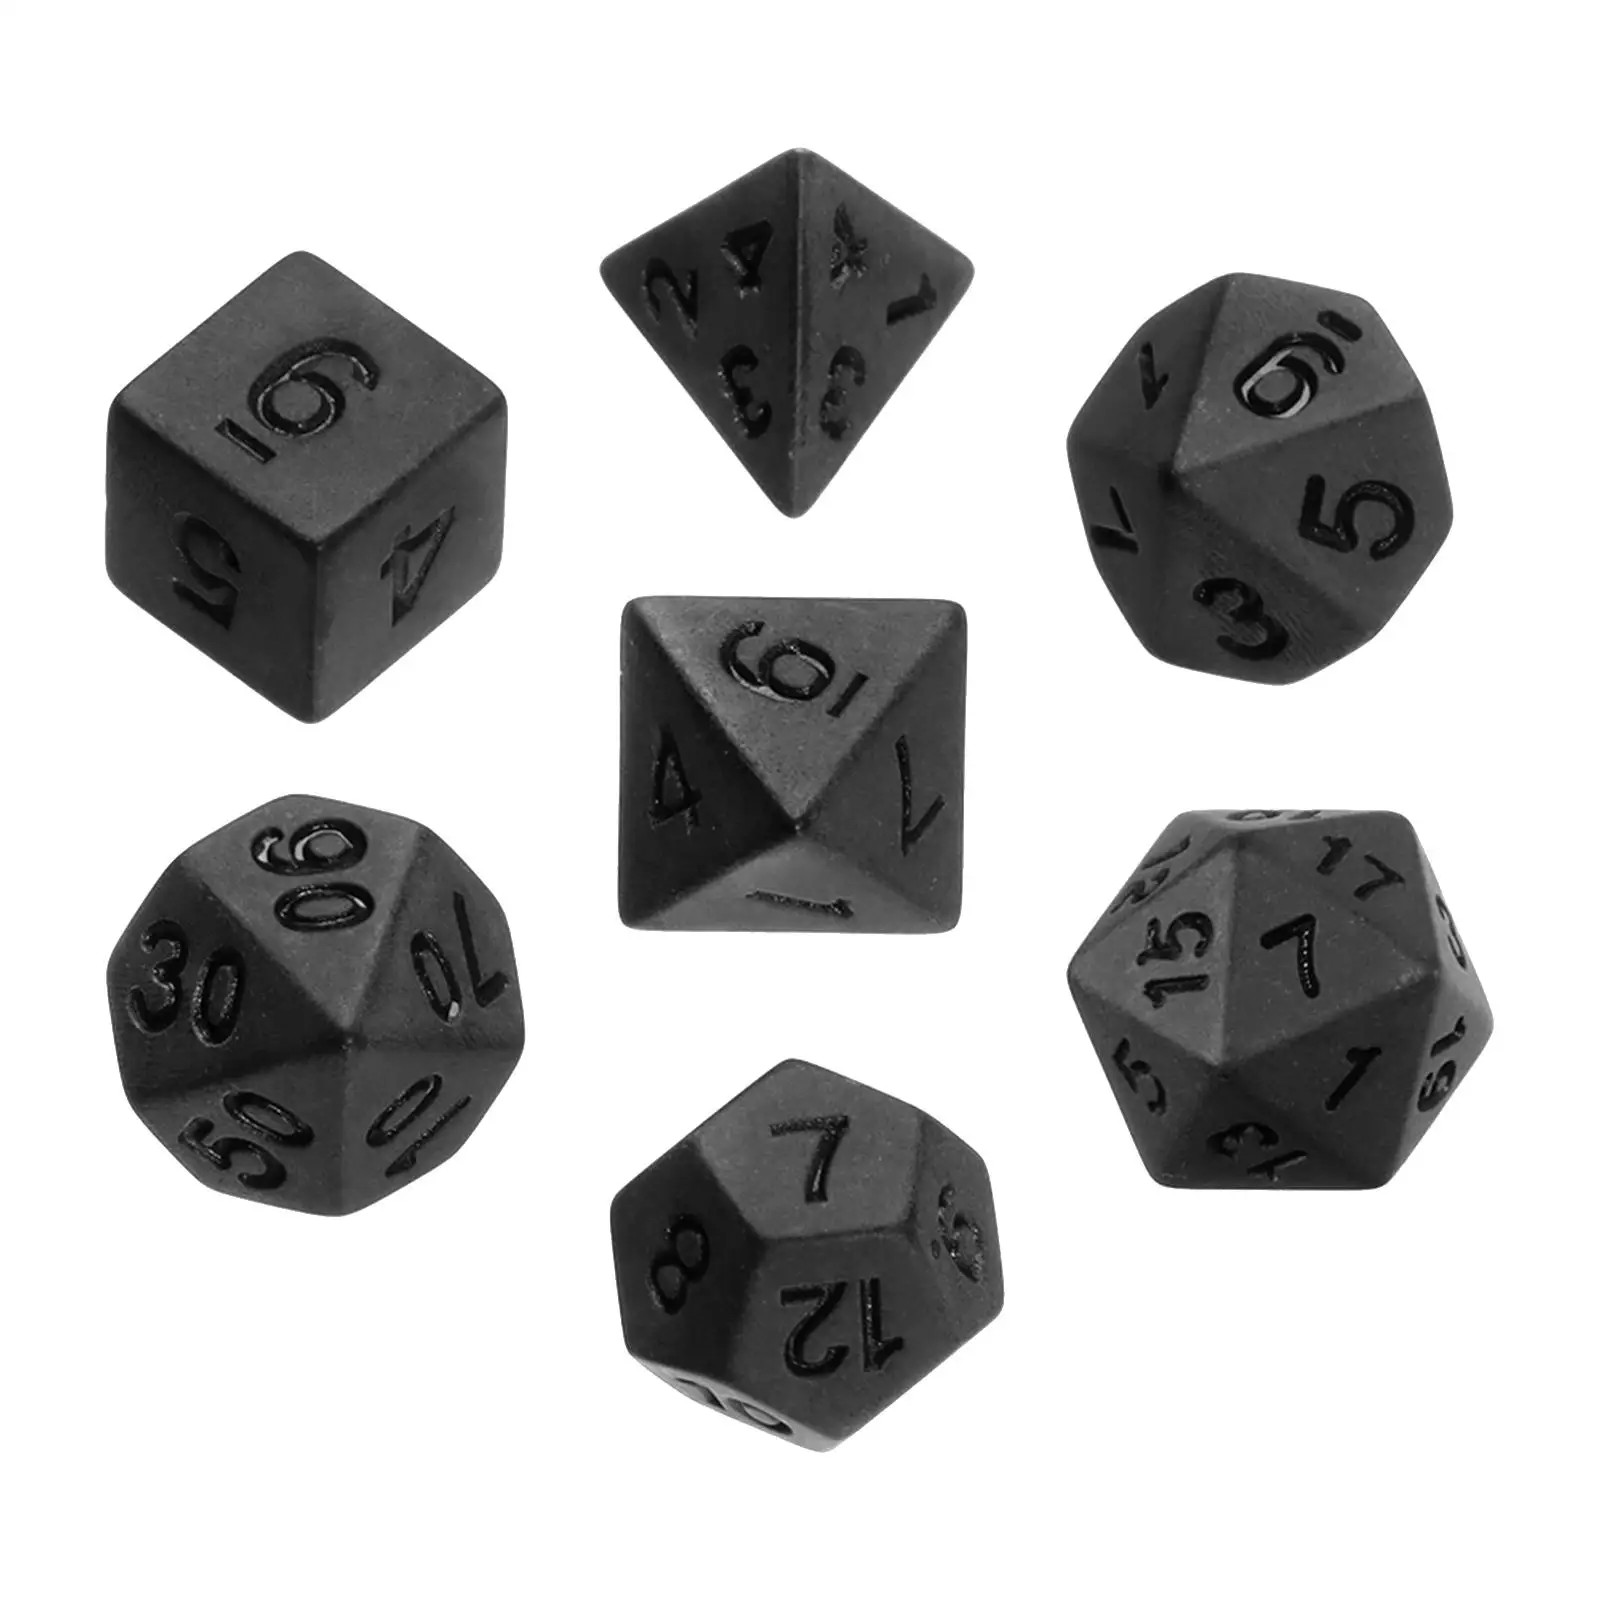 7 Pieces Polyhedral Dice black Multi Sided RPG Dices for Entertainment